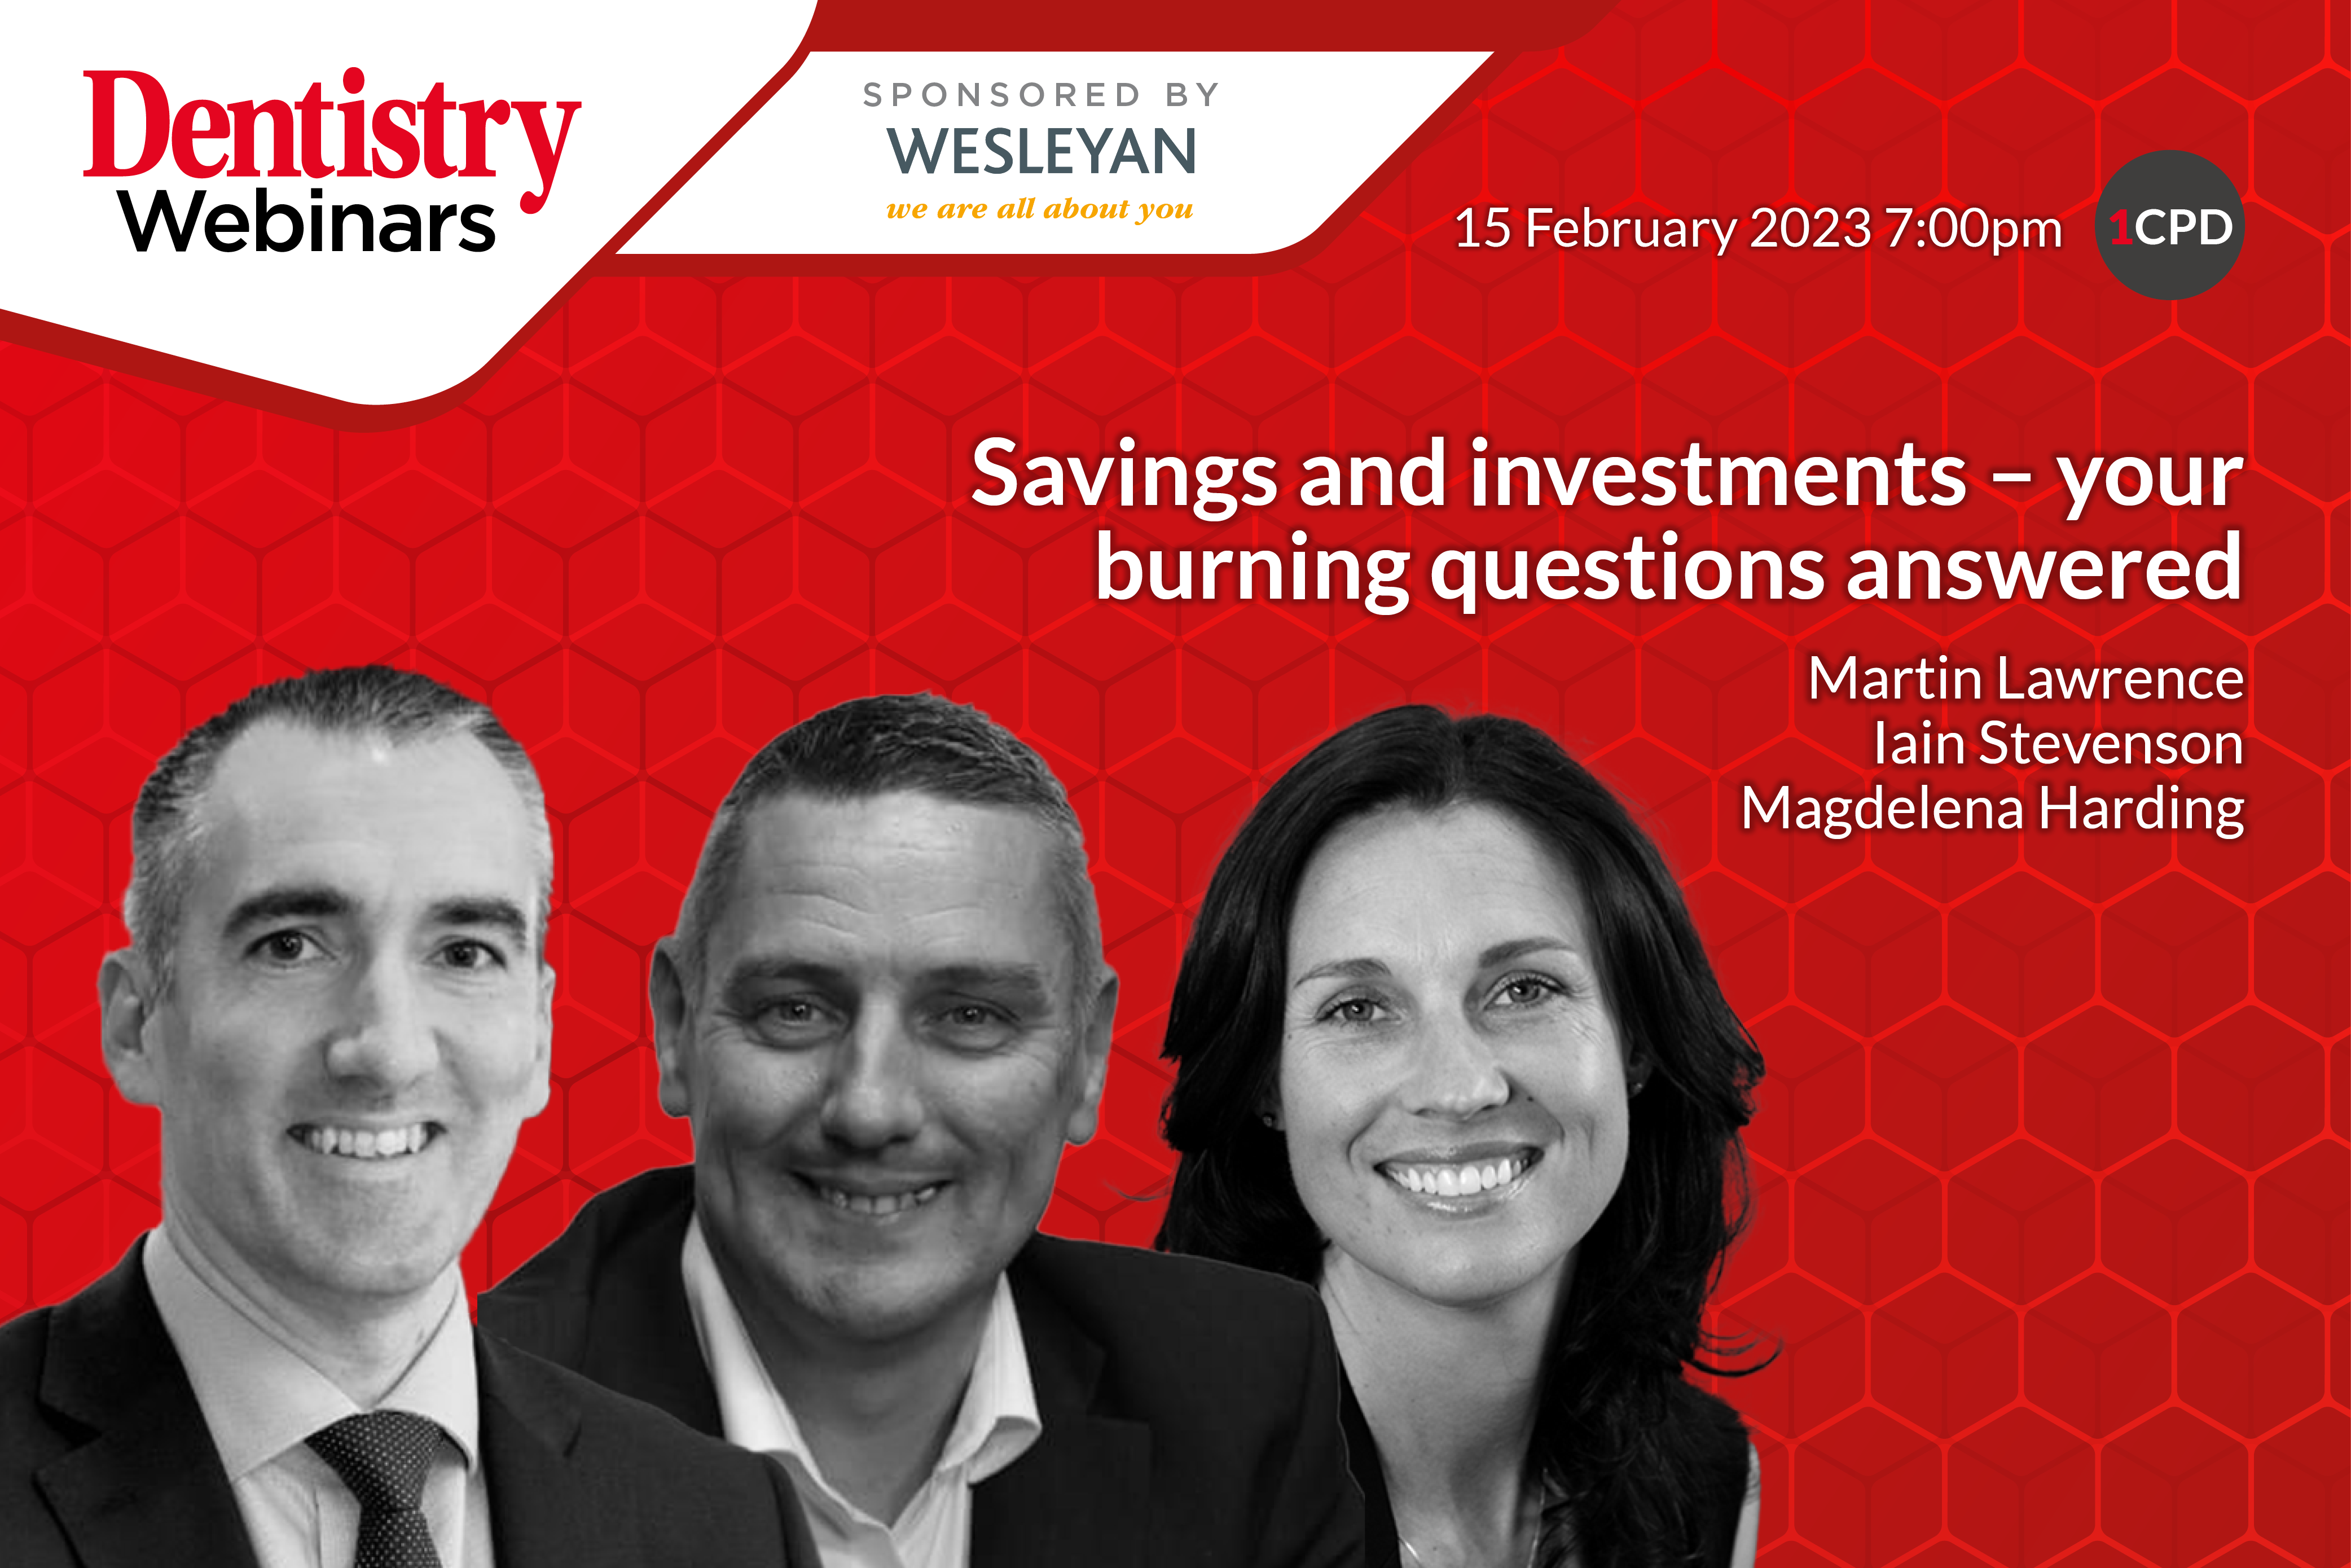 Join Martin Lawrence, Iain Stevenson and Magdelena Harding on Wednesday 15 February at 7pm for a panel discussion on savings and investments.